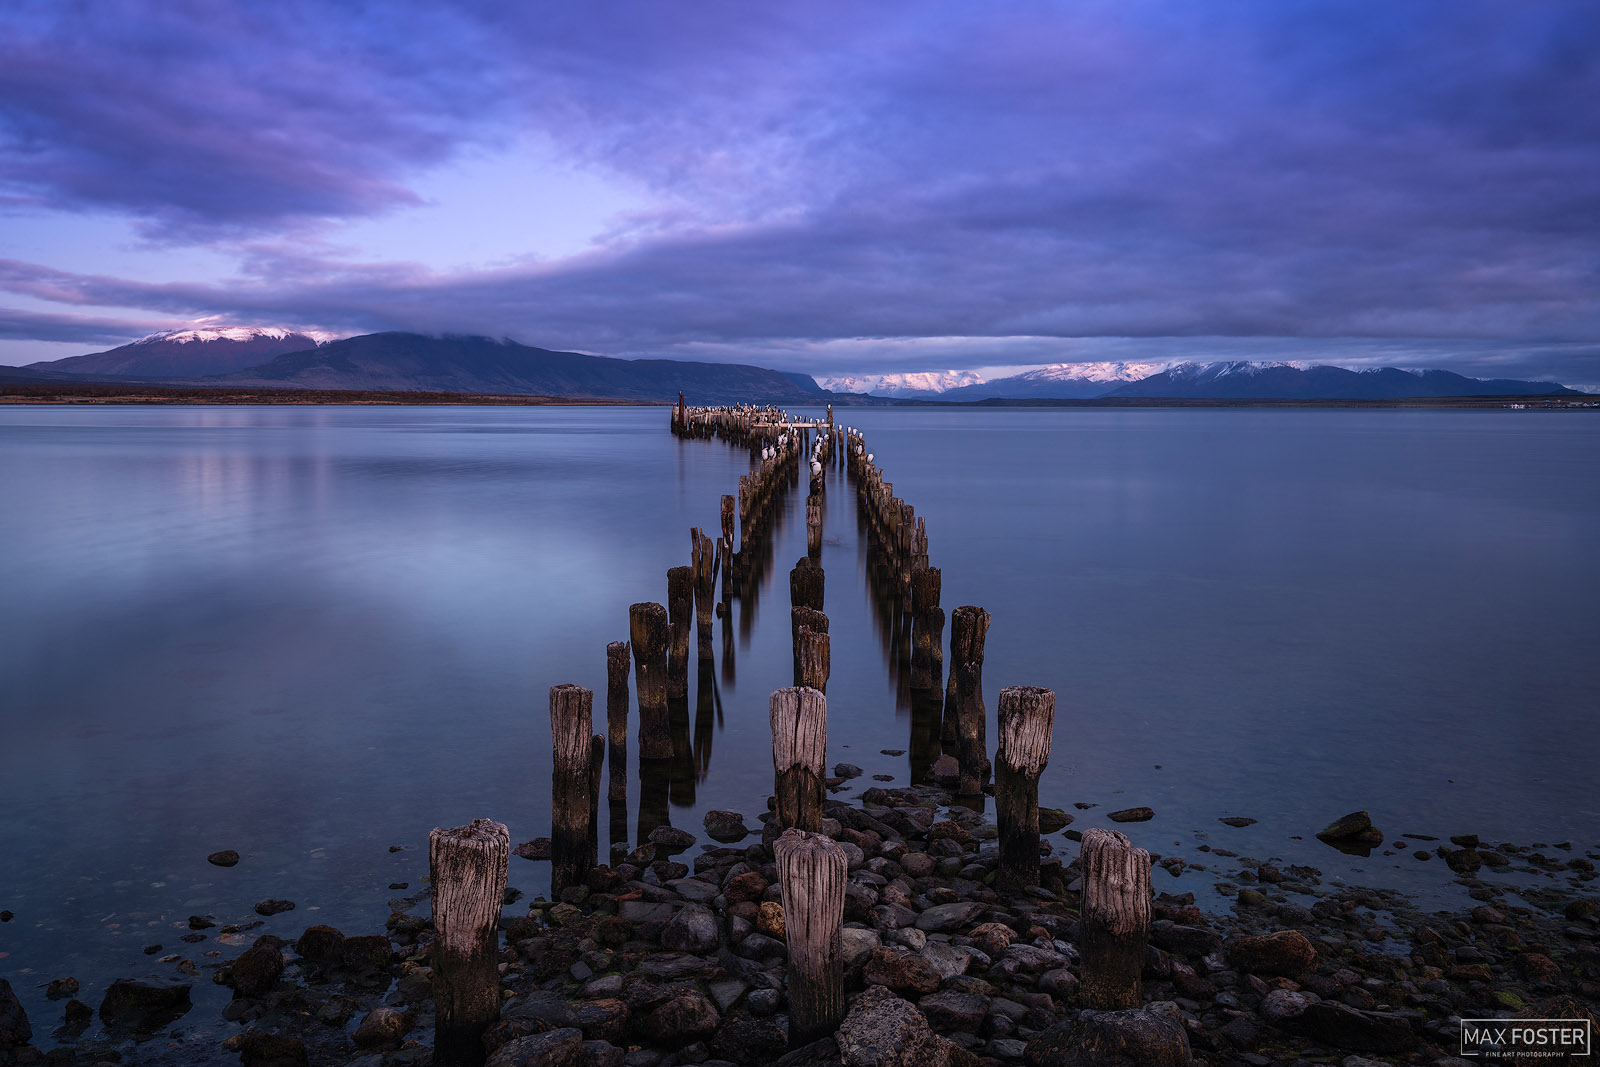 Transform your living space with Pier Of Yesteryear, Max Foster's limited edition photography print of Puerto Natales, Chile...